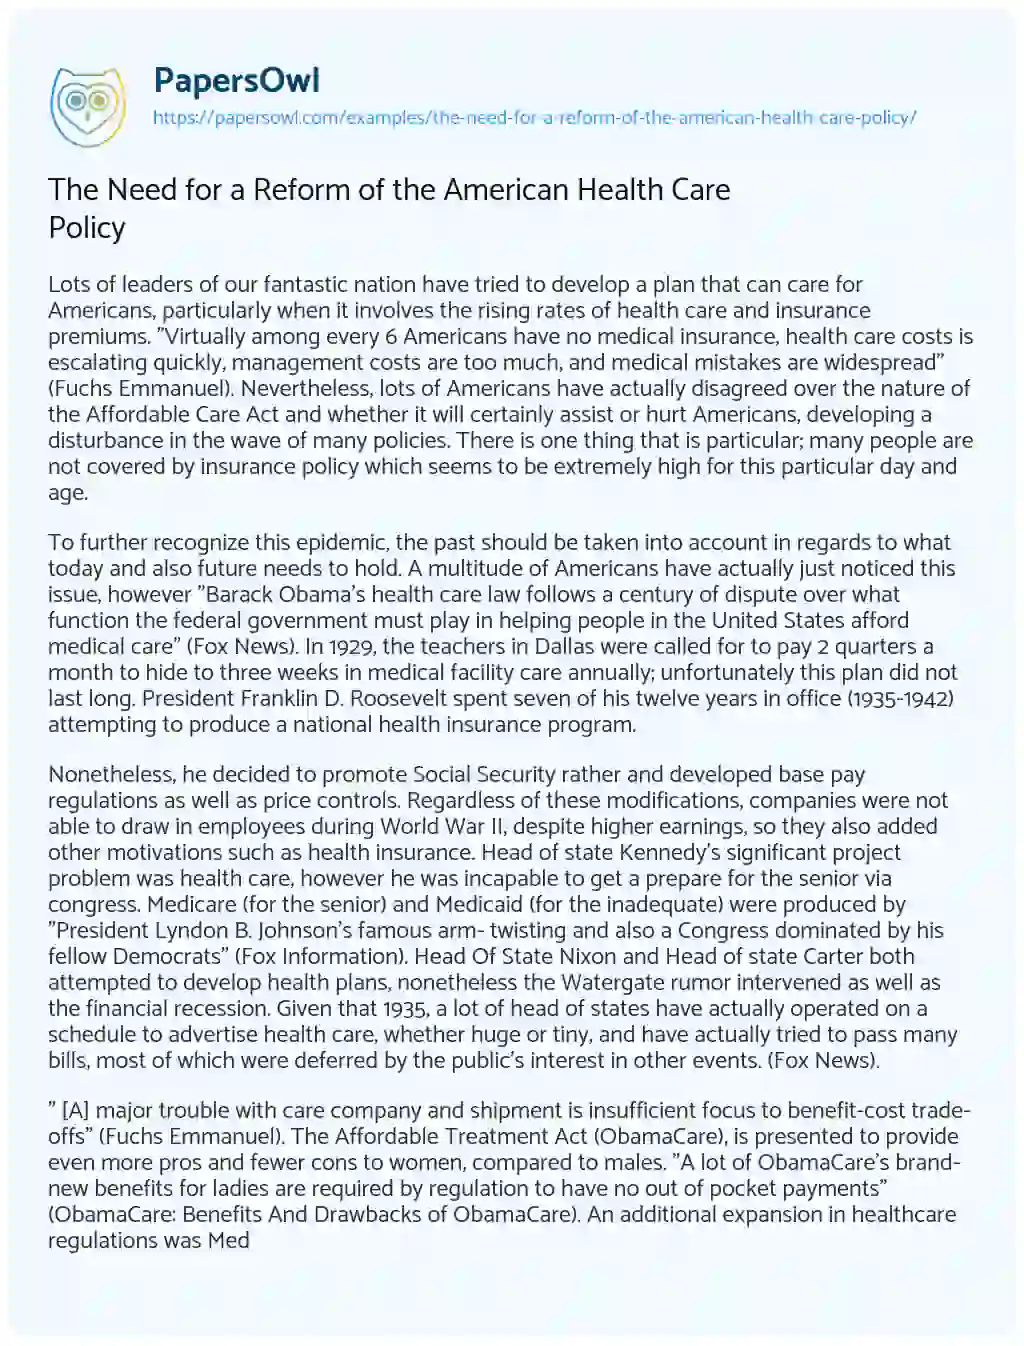 Essay on The Need for a Reform of the American Health Care Policy